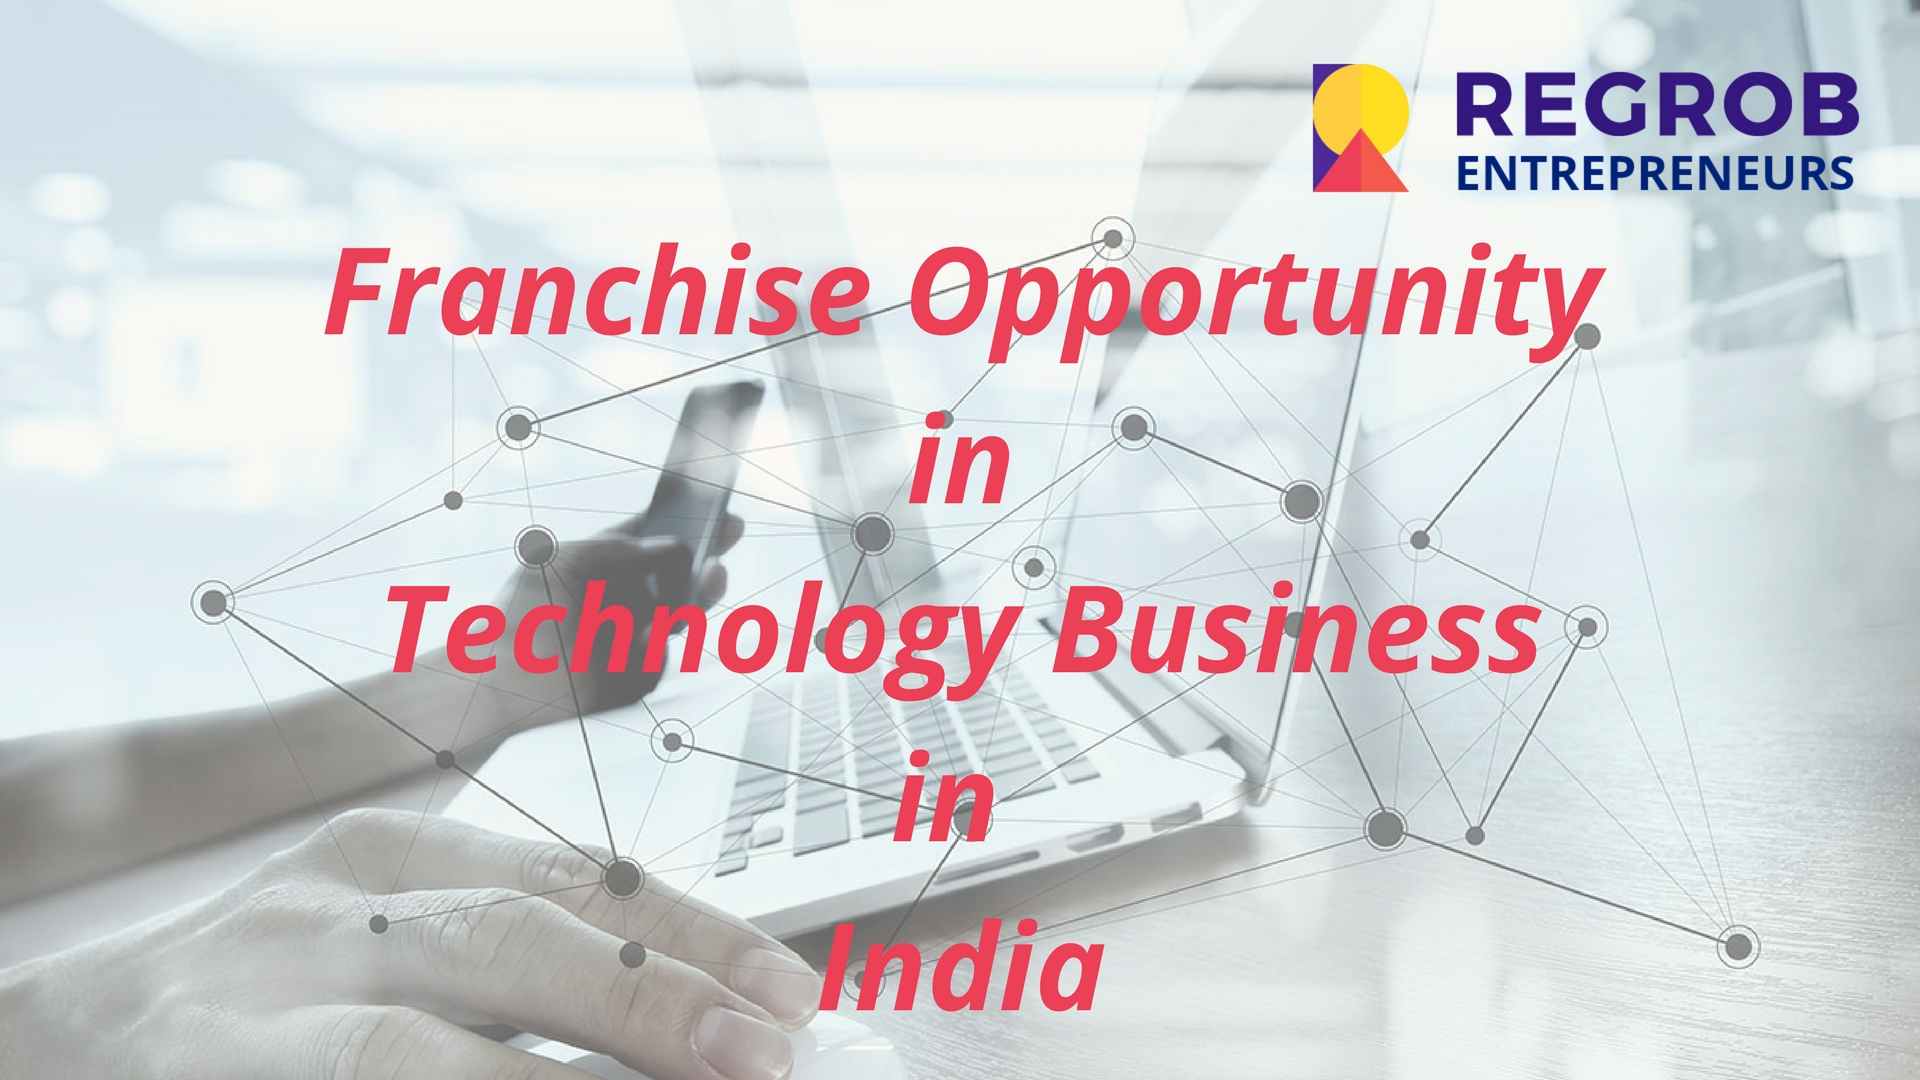 Franchise Opportunity in Technology Business in India